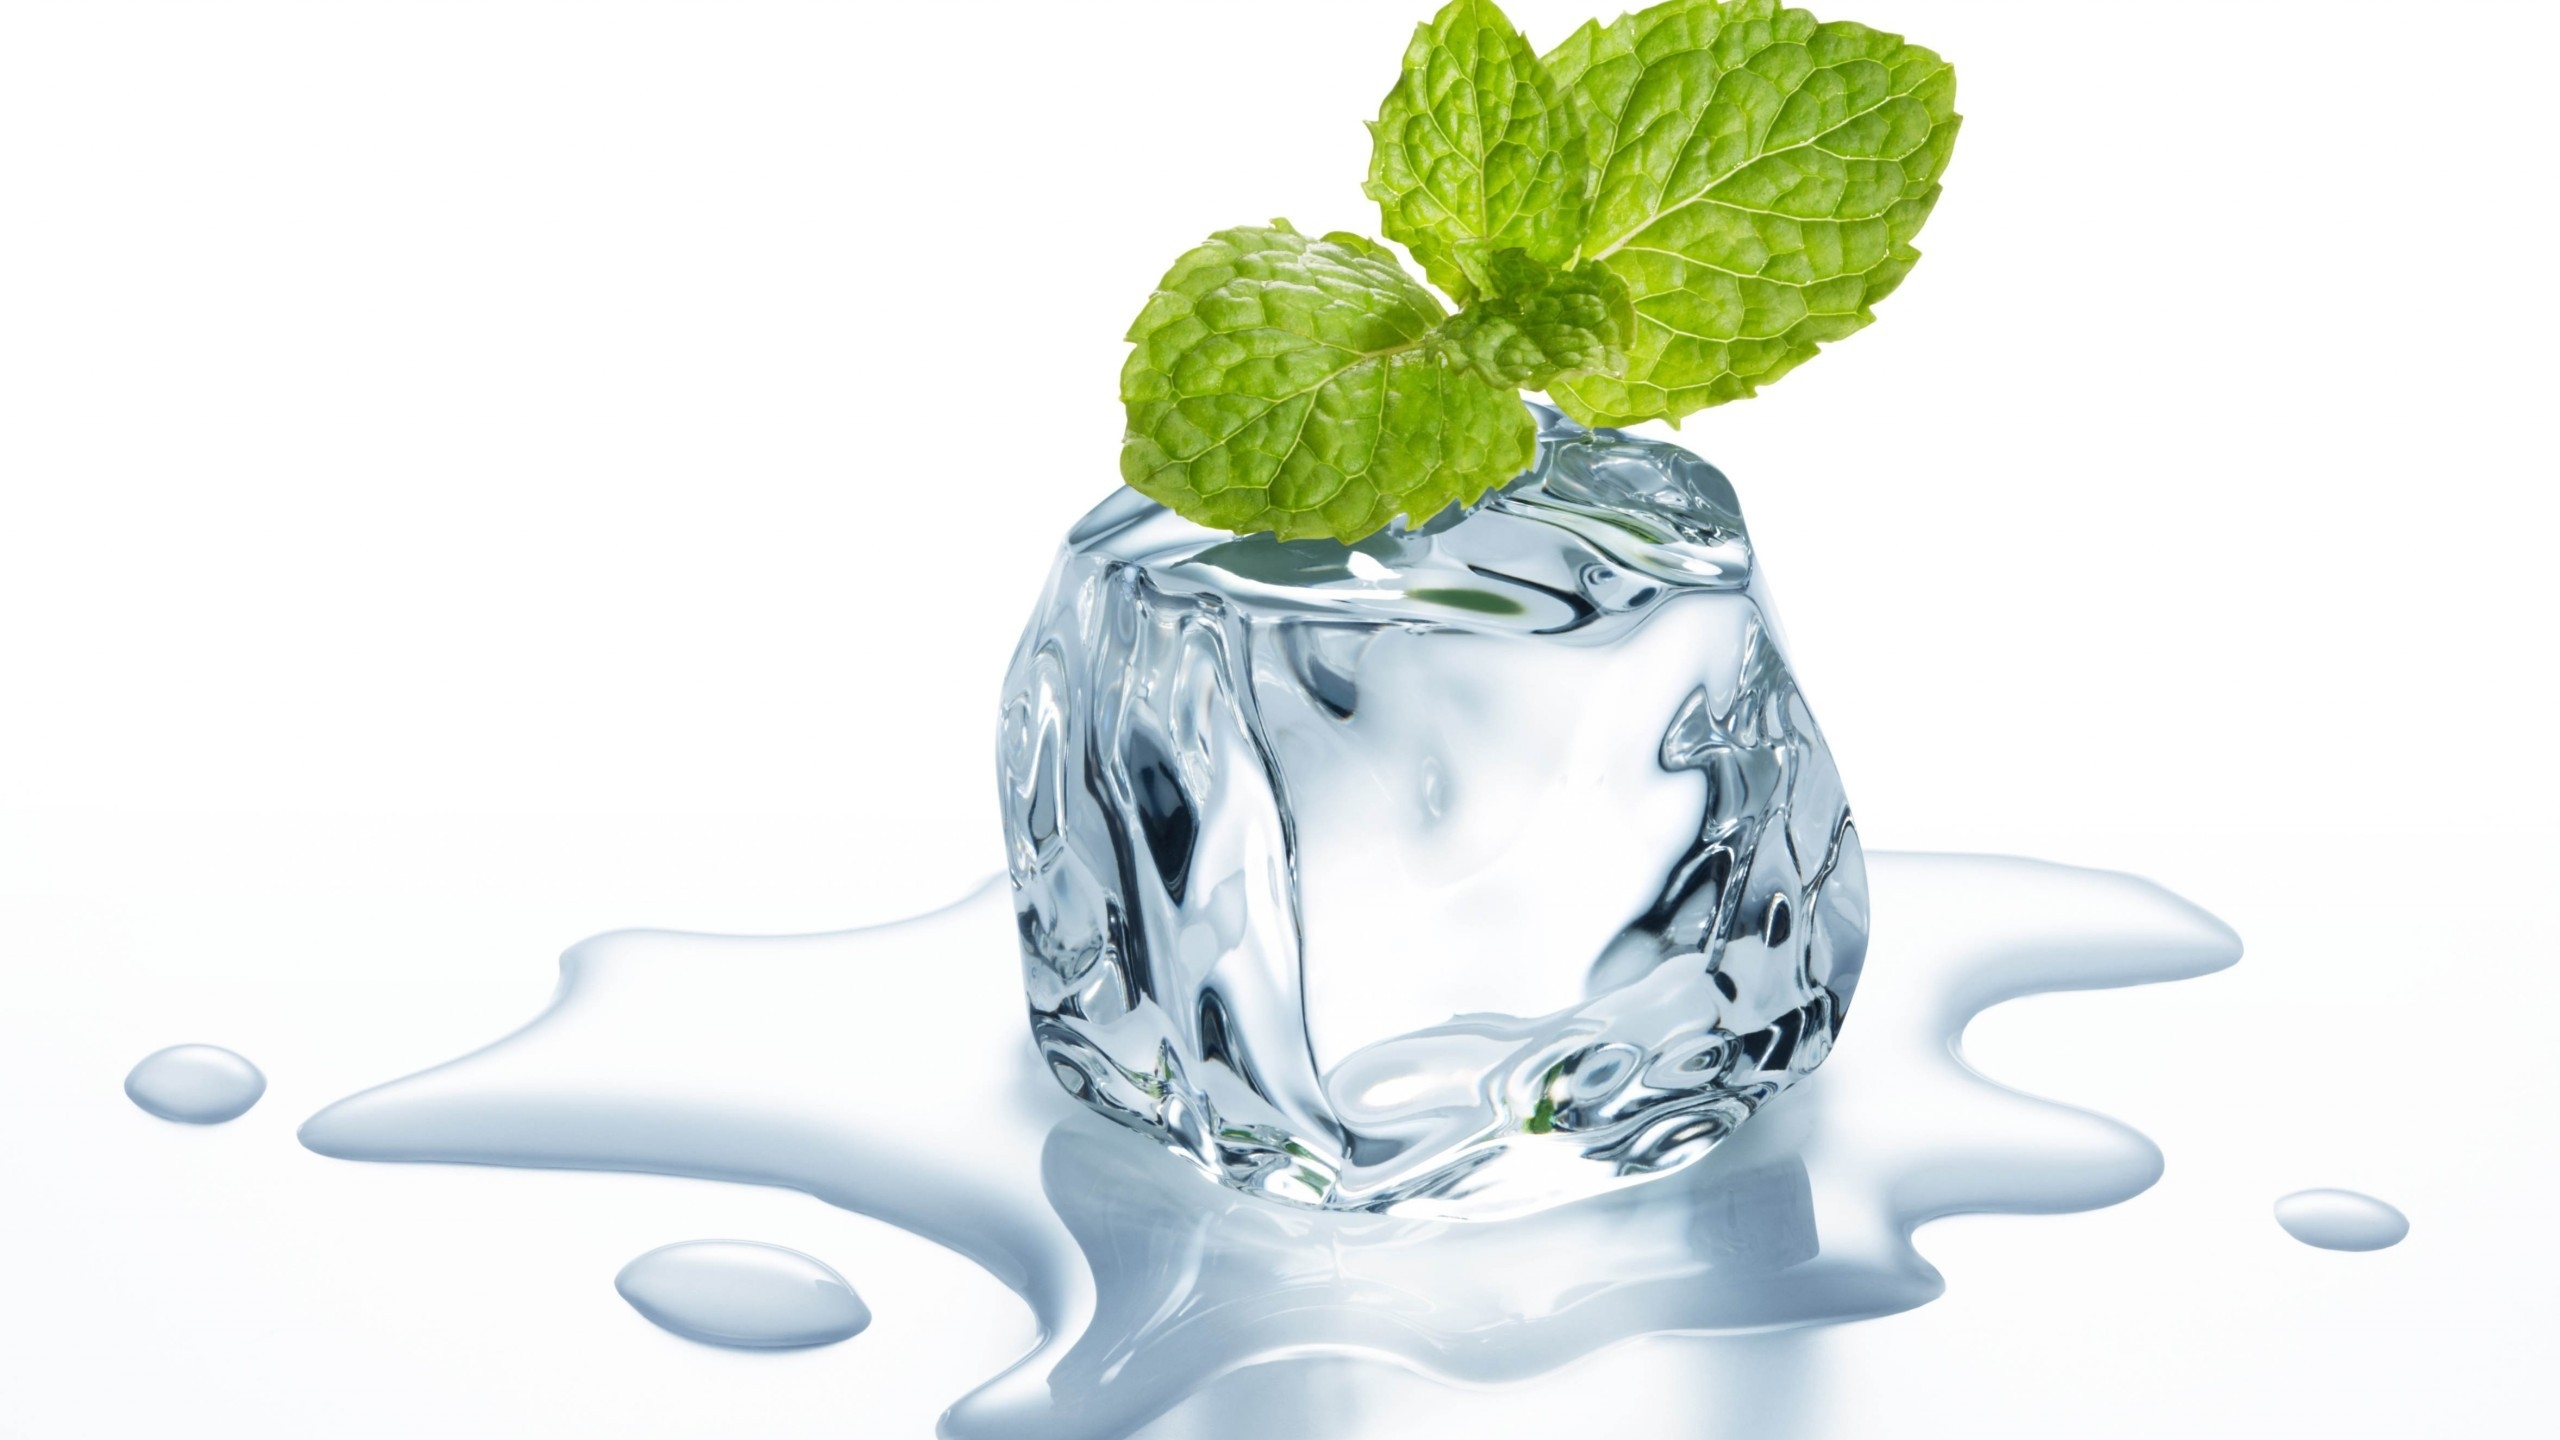 Ice Cube and Mint for 2560x1440 HDTV resolution